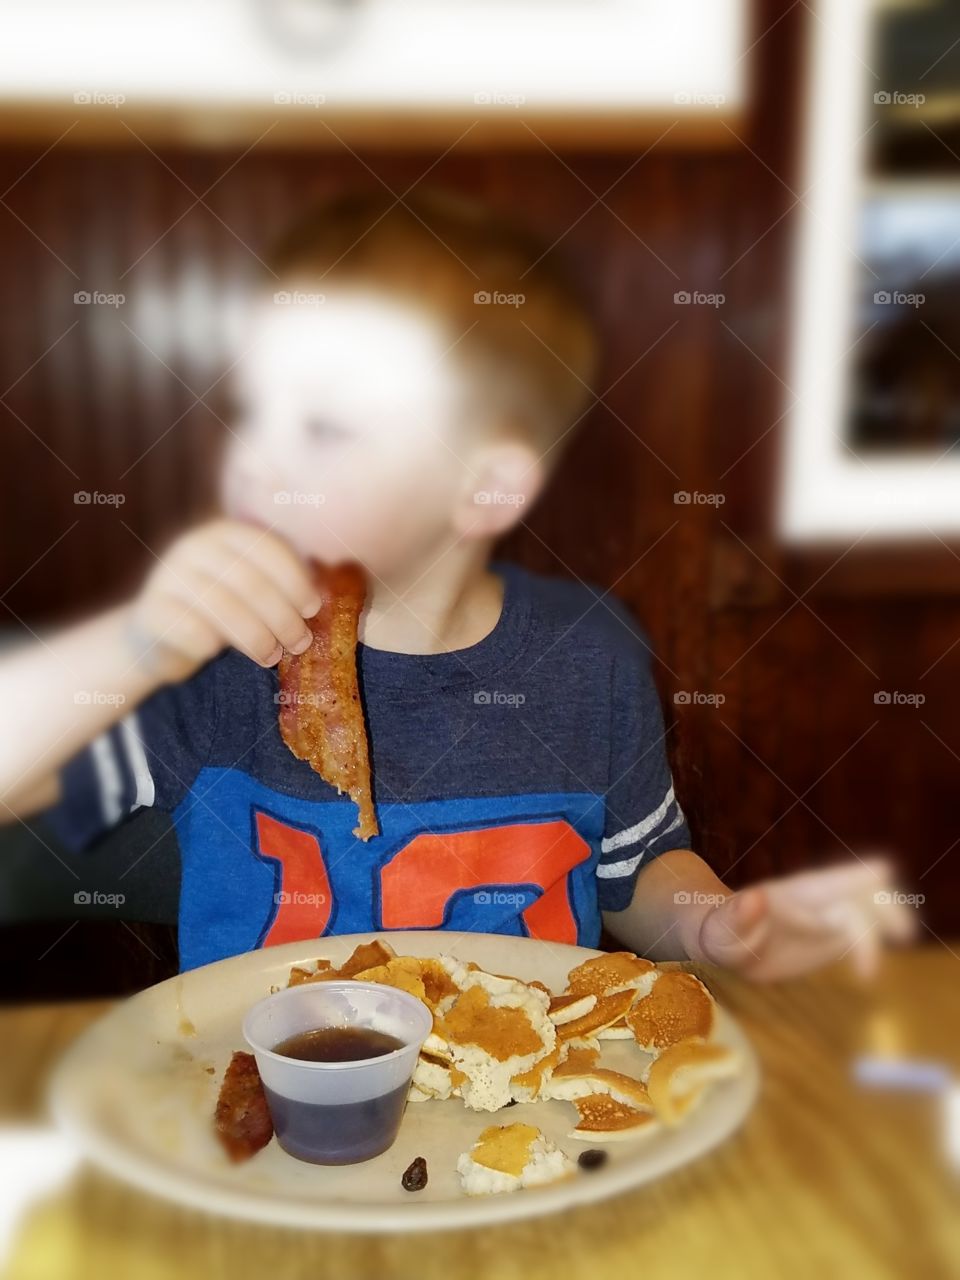 Young boy methodically dips bacon in syrup, anticipating the burst of flavors to come.